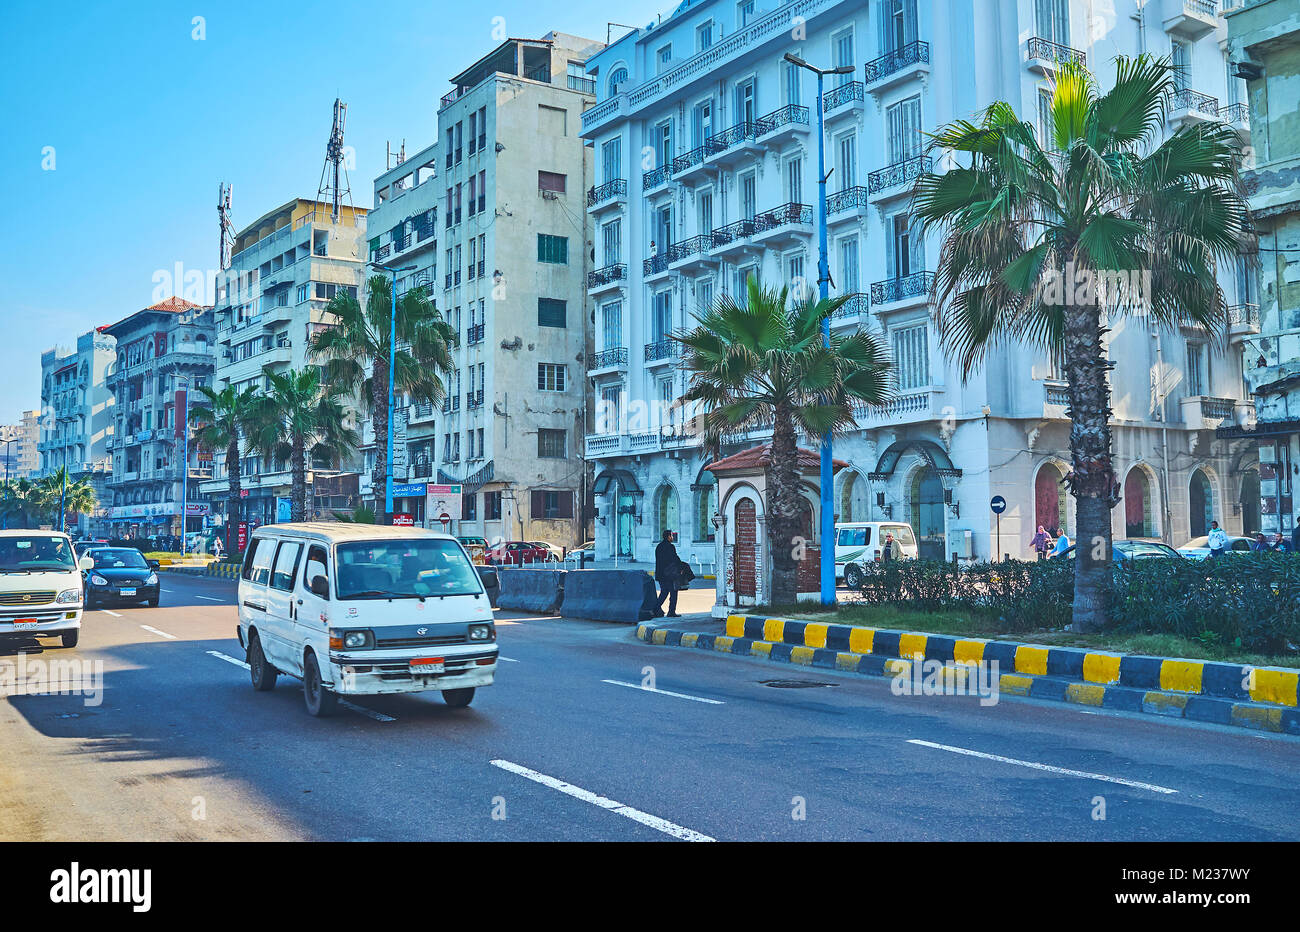 ALEXANDRIA, EGYPT - DECEMBER 17, 2017: The mini bus rides along the Corniche avenue with palm trees and Colonial style buildings on background, on Dec Stock Photo